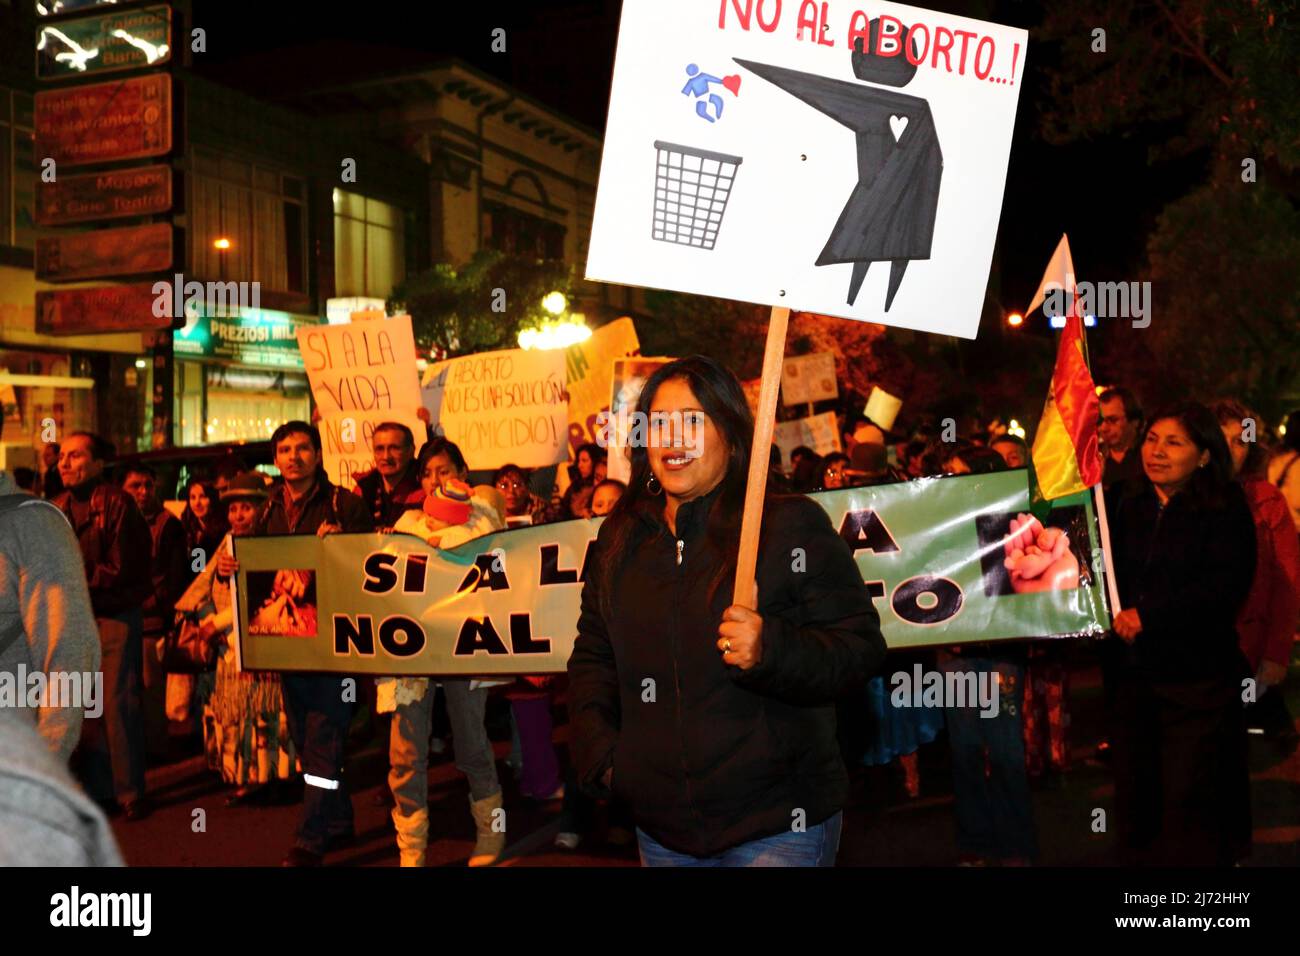 LA PAZ, BOLIVIA, 22nd August 2013. People take part in a march organised by the Red Pro-Vida (Pro Life Network) to protest against decriminalising abortion. Bolivia has been debating whether to decriminalise abortion since March 2012. Stock Photo